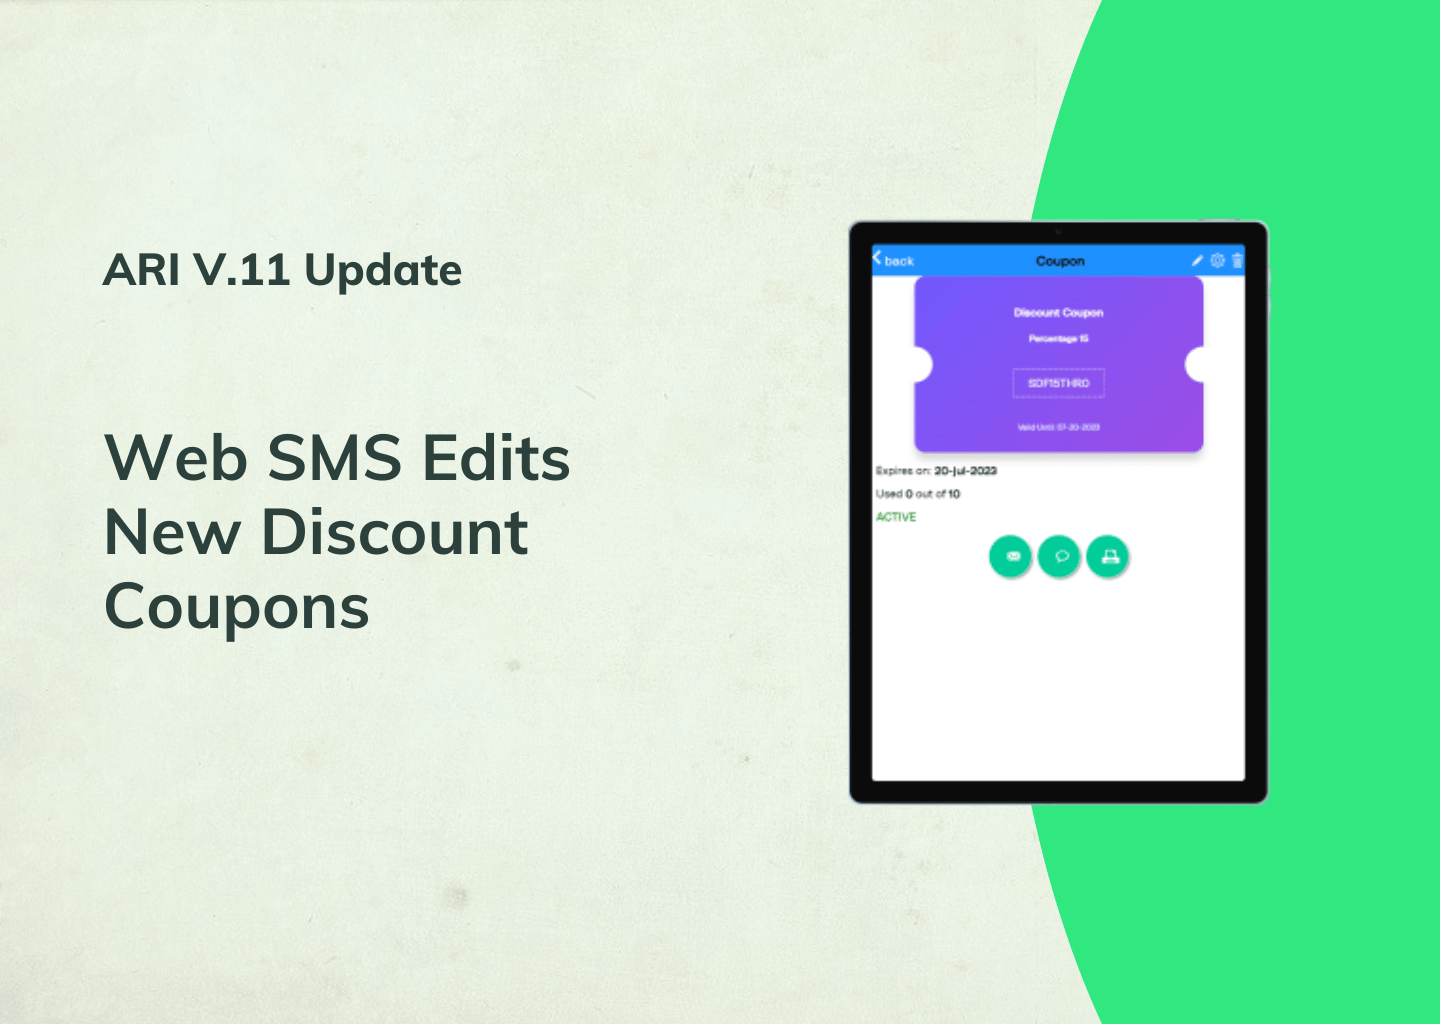 Web SMS Editing and Discount Coupon Redesign(new feature in ARI v.11)